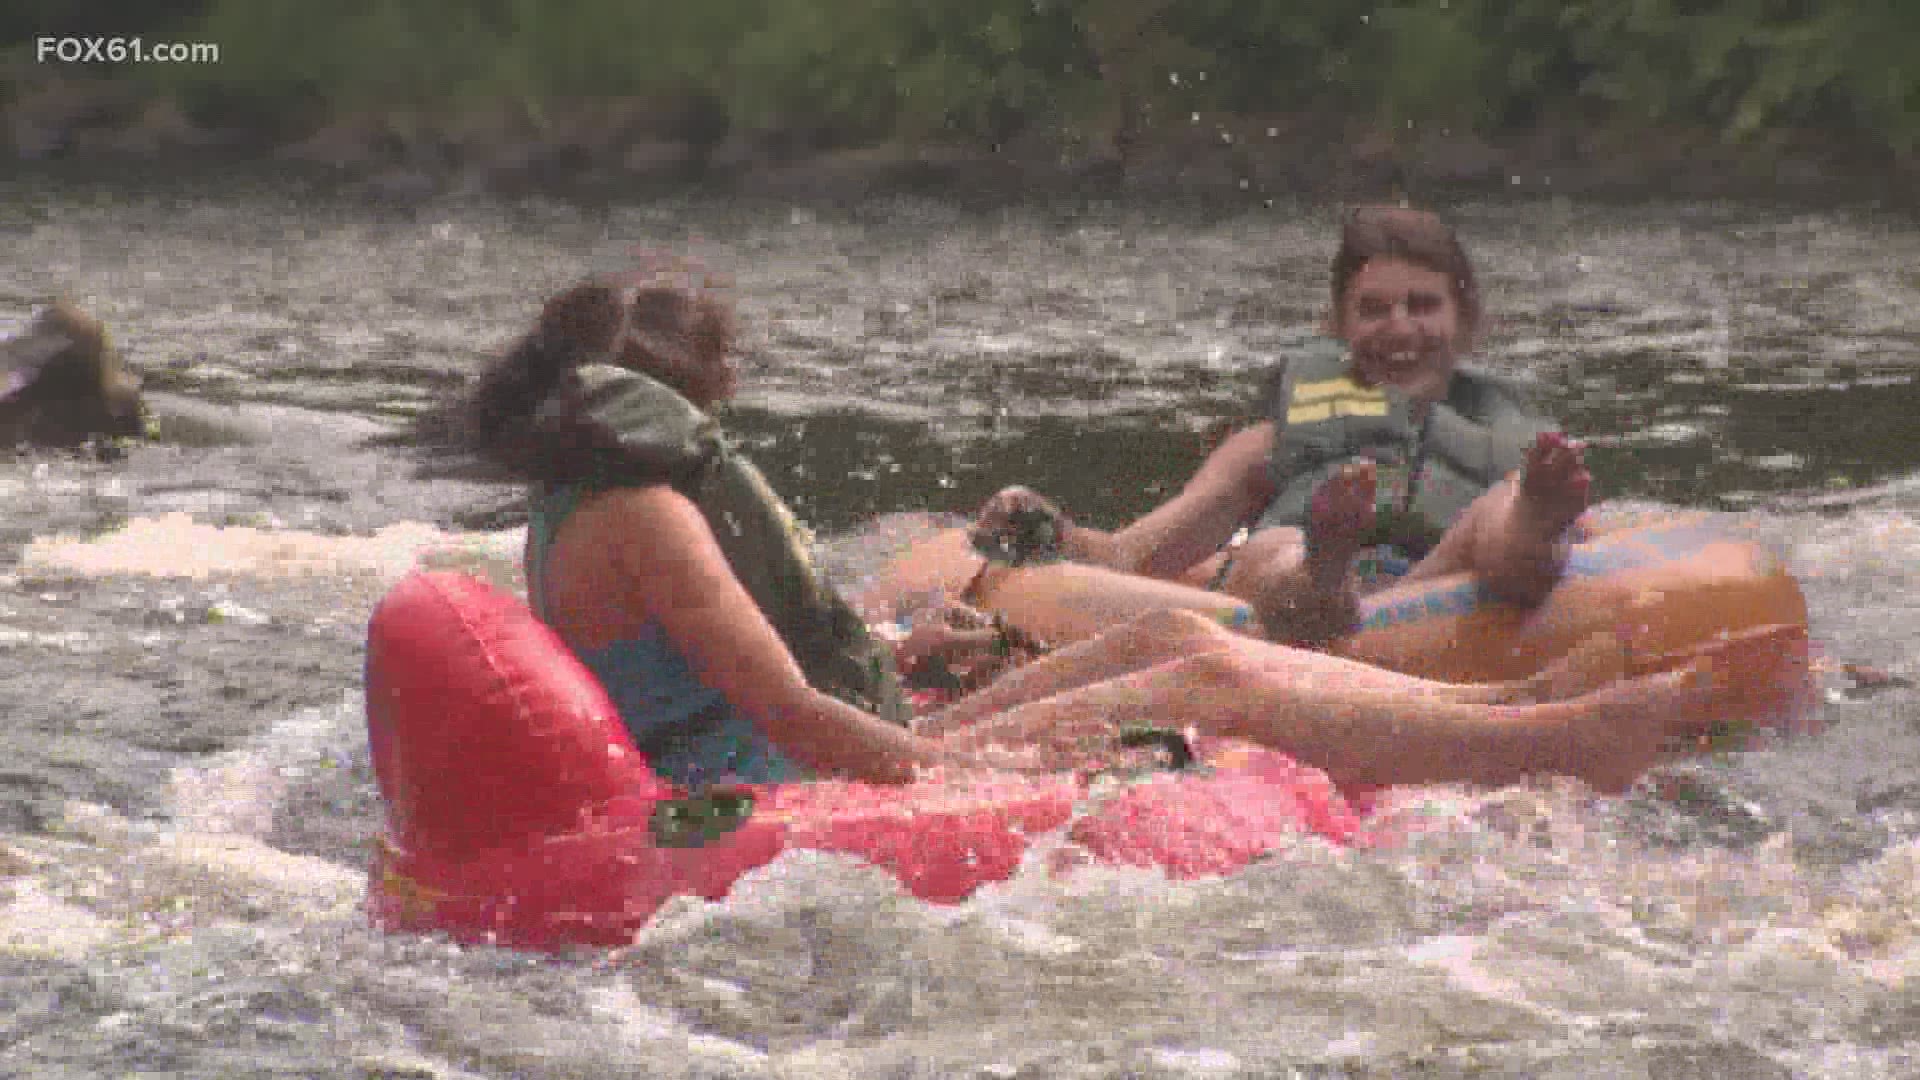 The team at Farmington River Tubing is welcoming guests back for another season afloat.